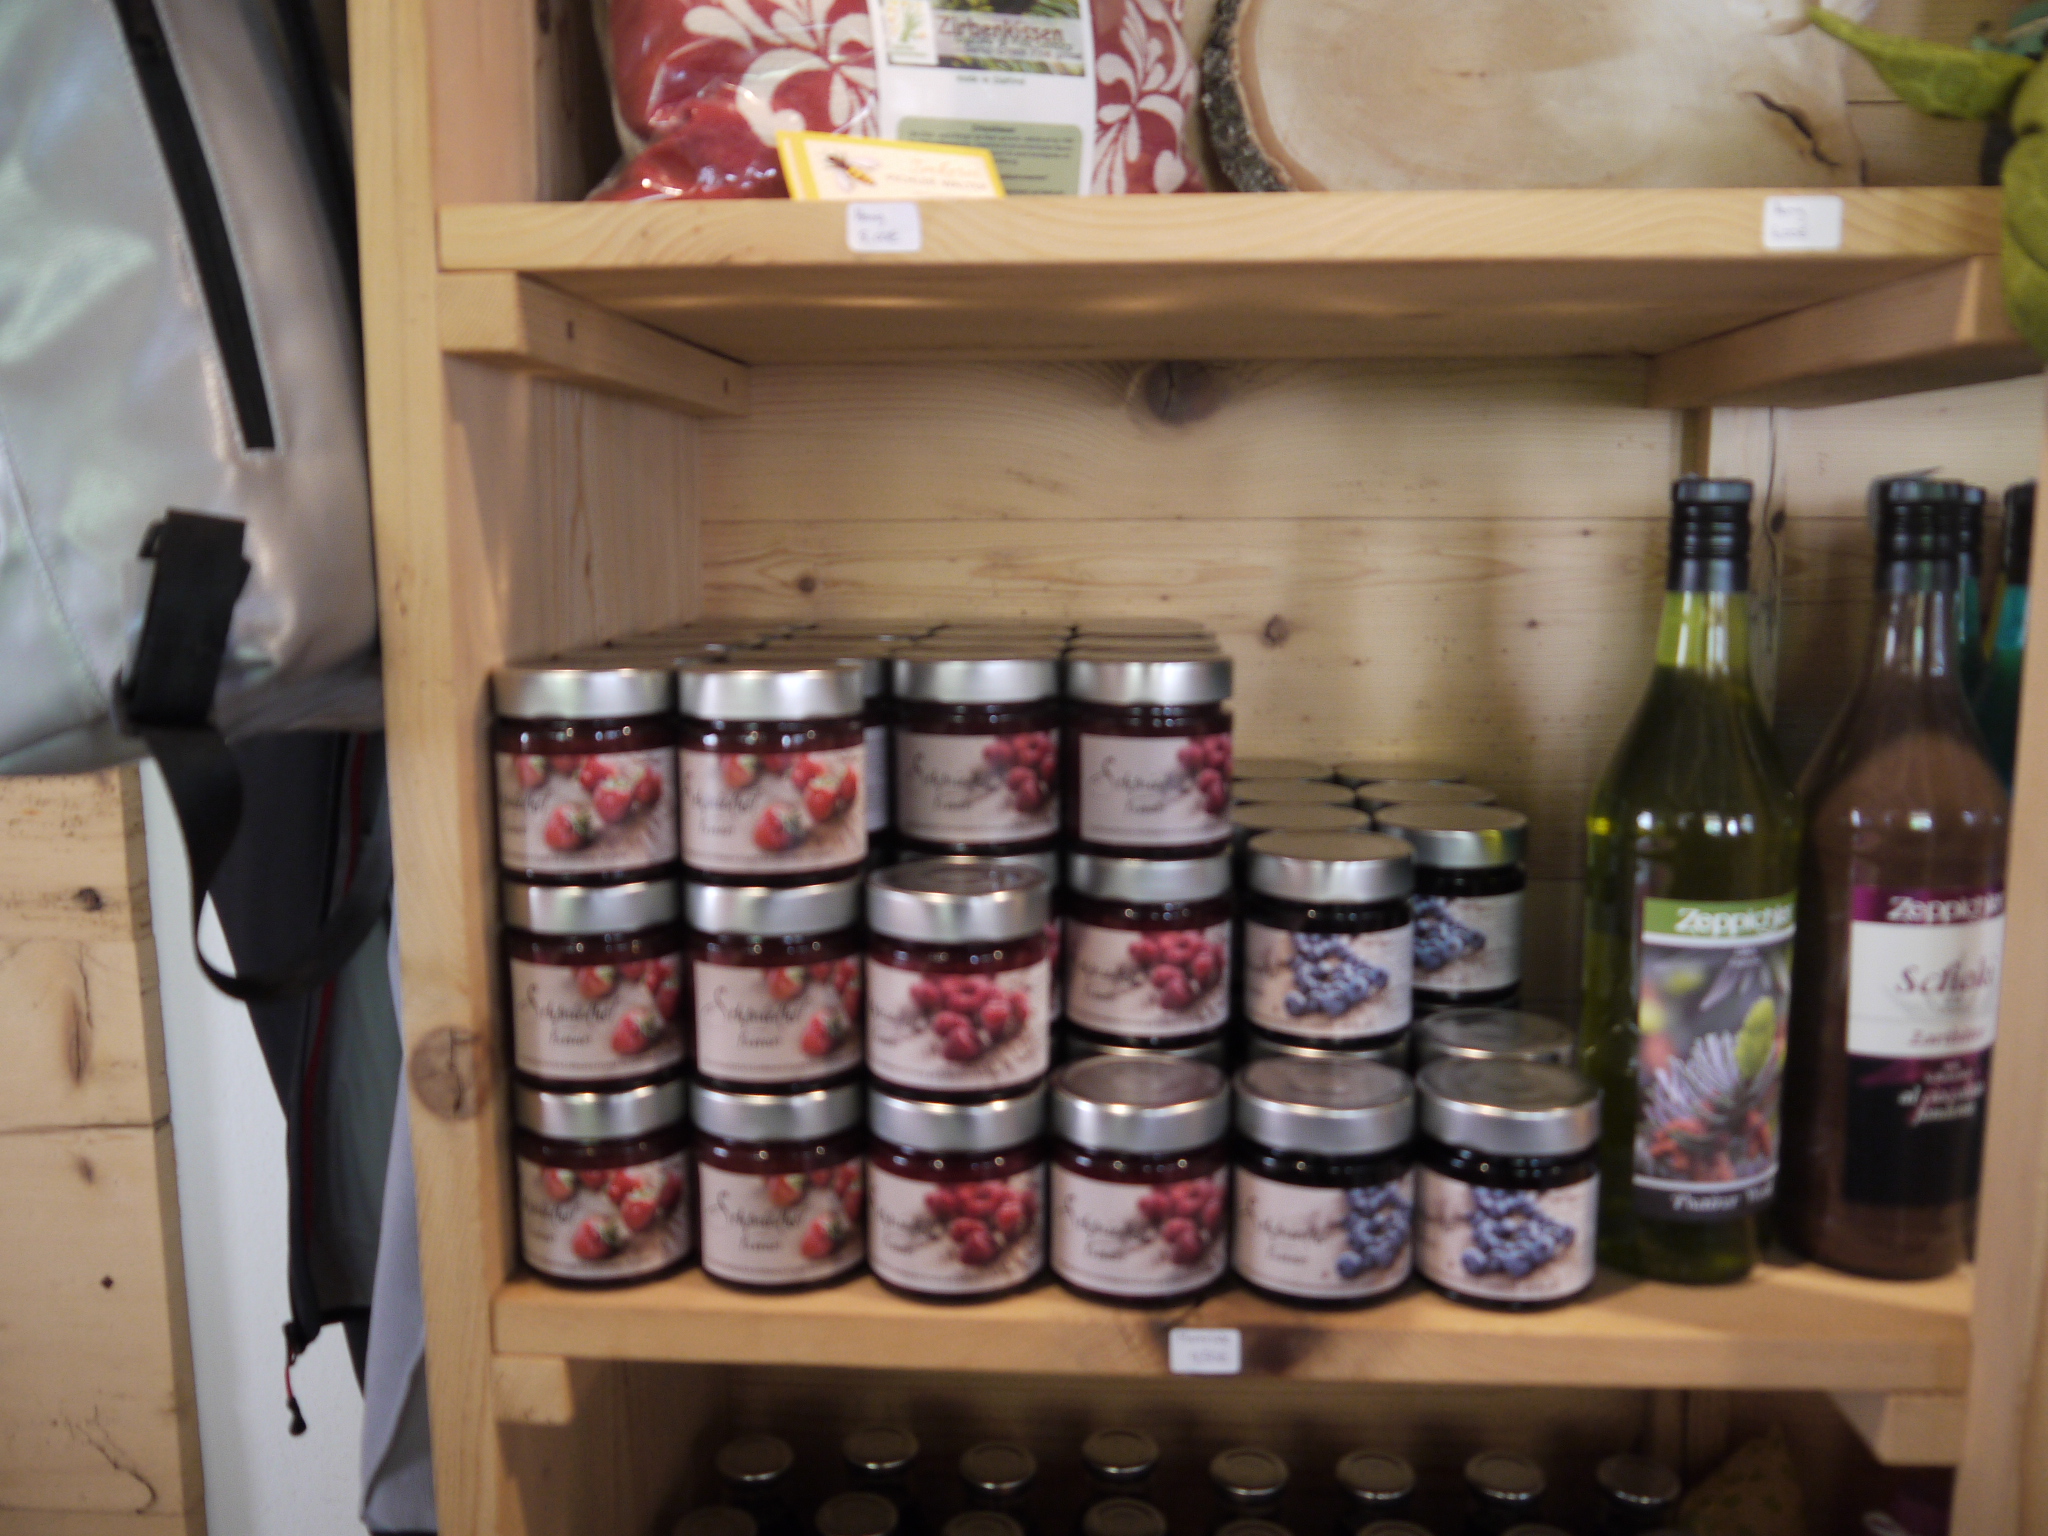 Local jams and juices at the Martin’s Hofladen Bauernguet